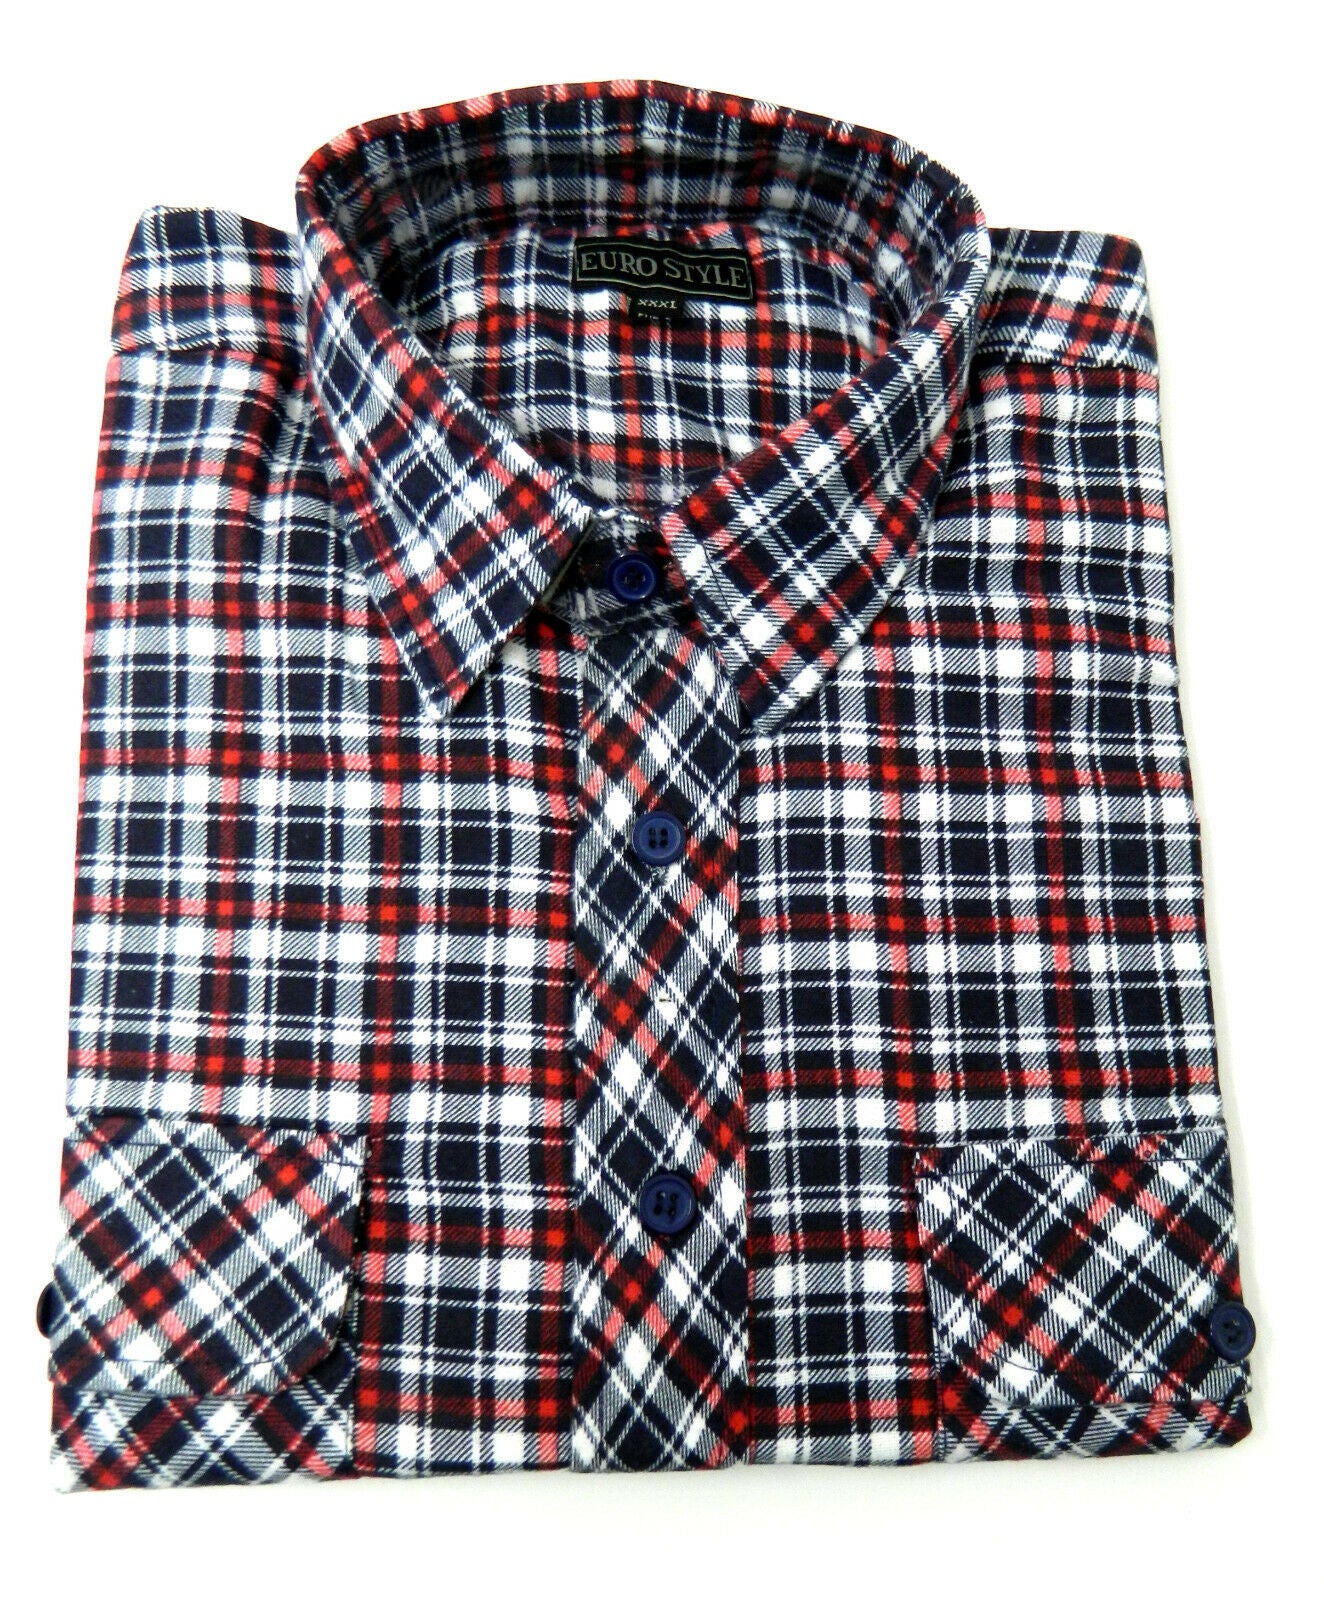 Men's Lumberjack Flannel Shirt In Small Red & Navy Check.